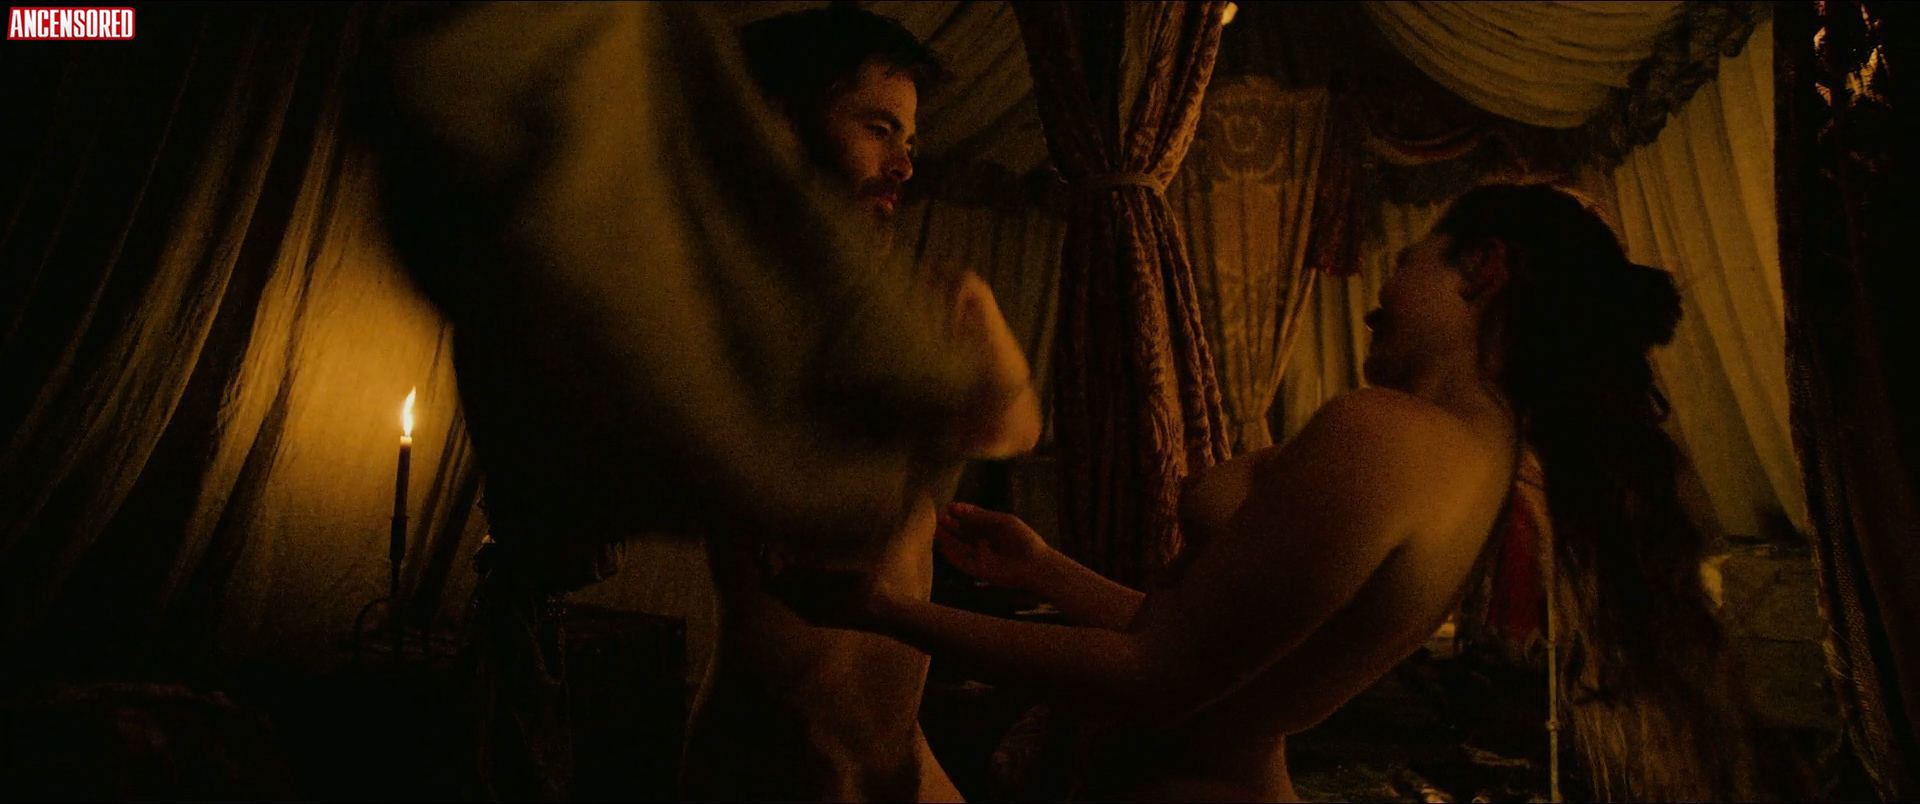 Florence Pugh Nude Scene From Outlaw King Enhanced In K The 